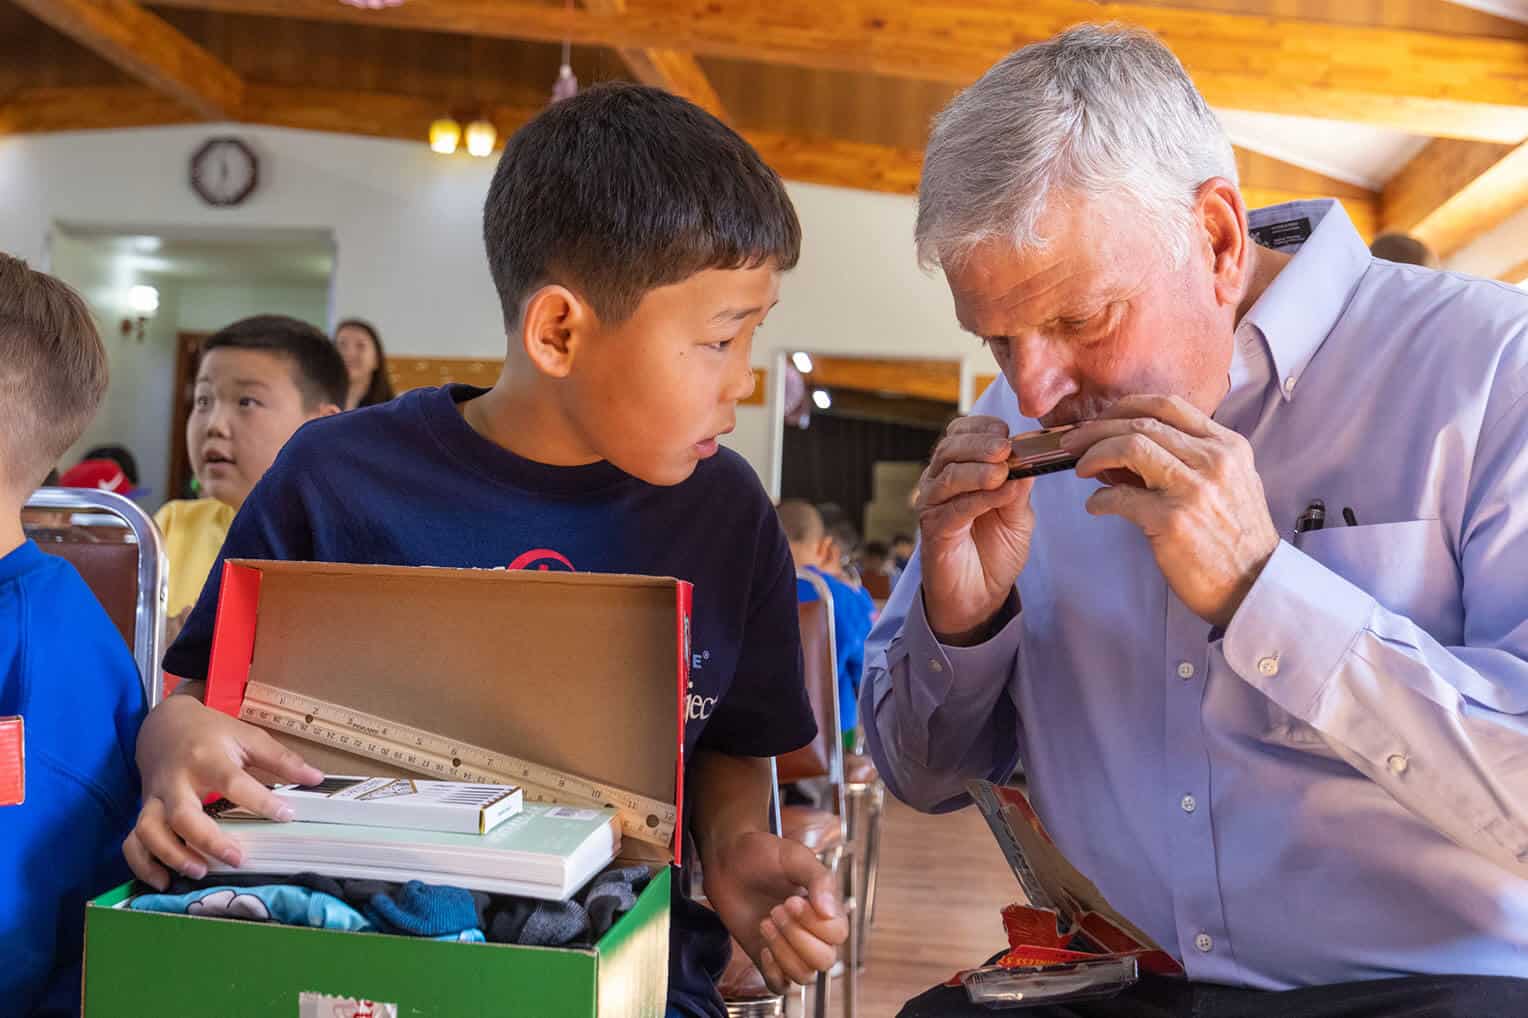 Franklin Graham shows Erdembayar how to play a harmonica, one of the gifts he received in his shoebox.